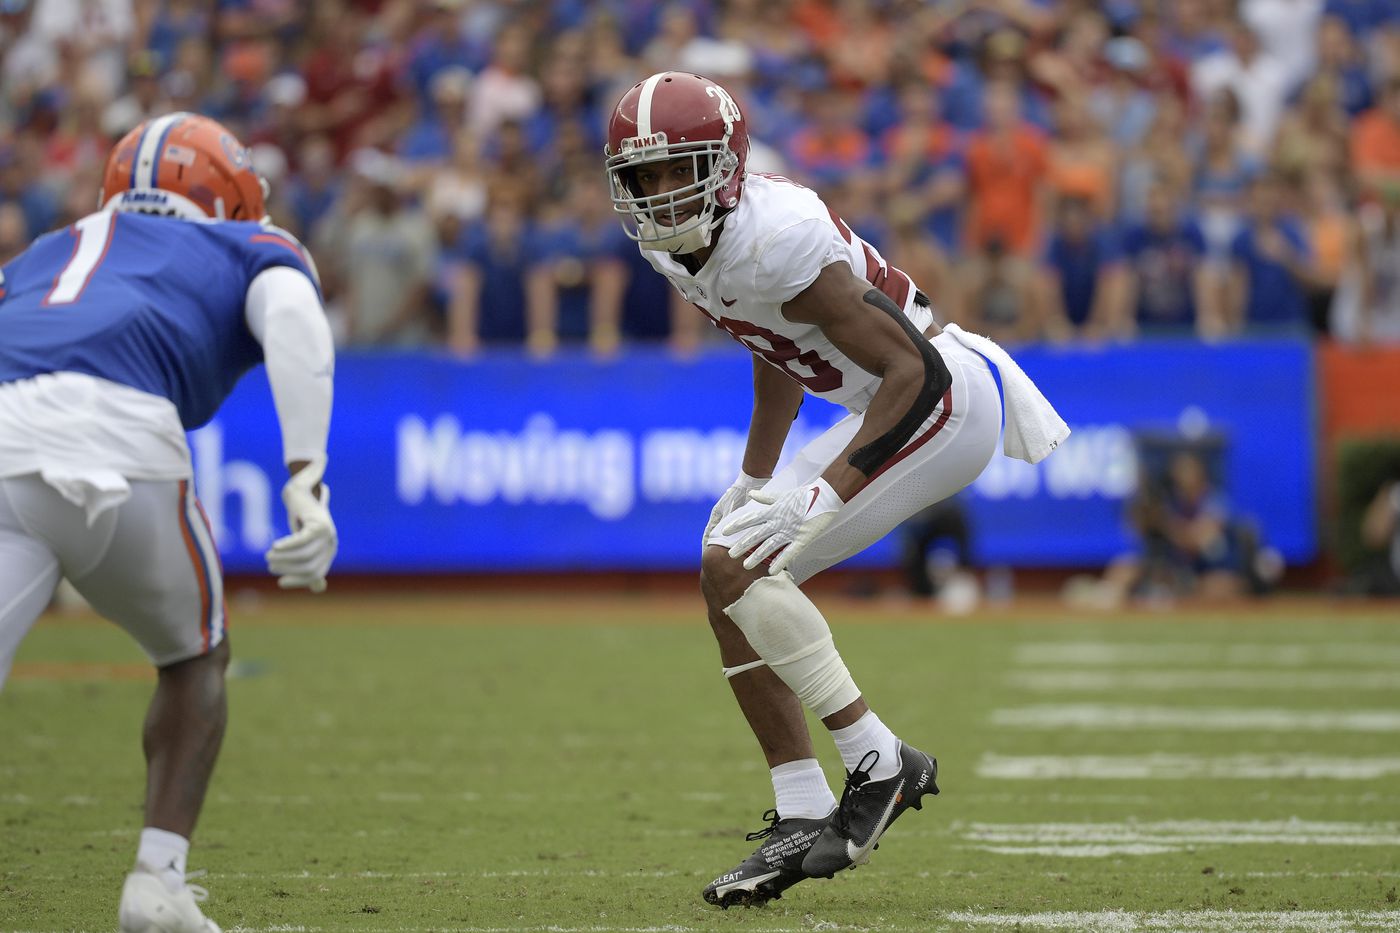 Alabama defensive back Josh Jobe (28) defends against Florida wide receiver Jacob Copeland (1) during the first half of a game, Sept. 18, 2021, in Gainesville, Fla.